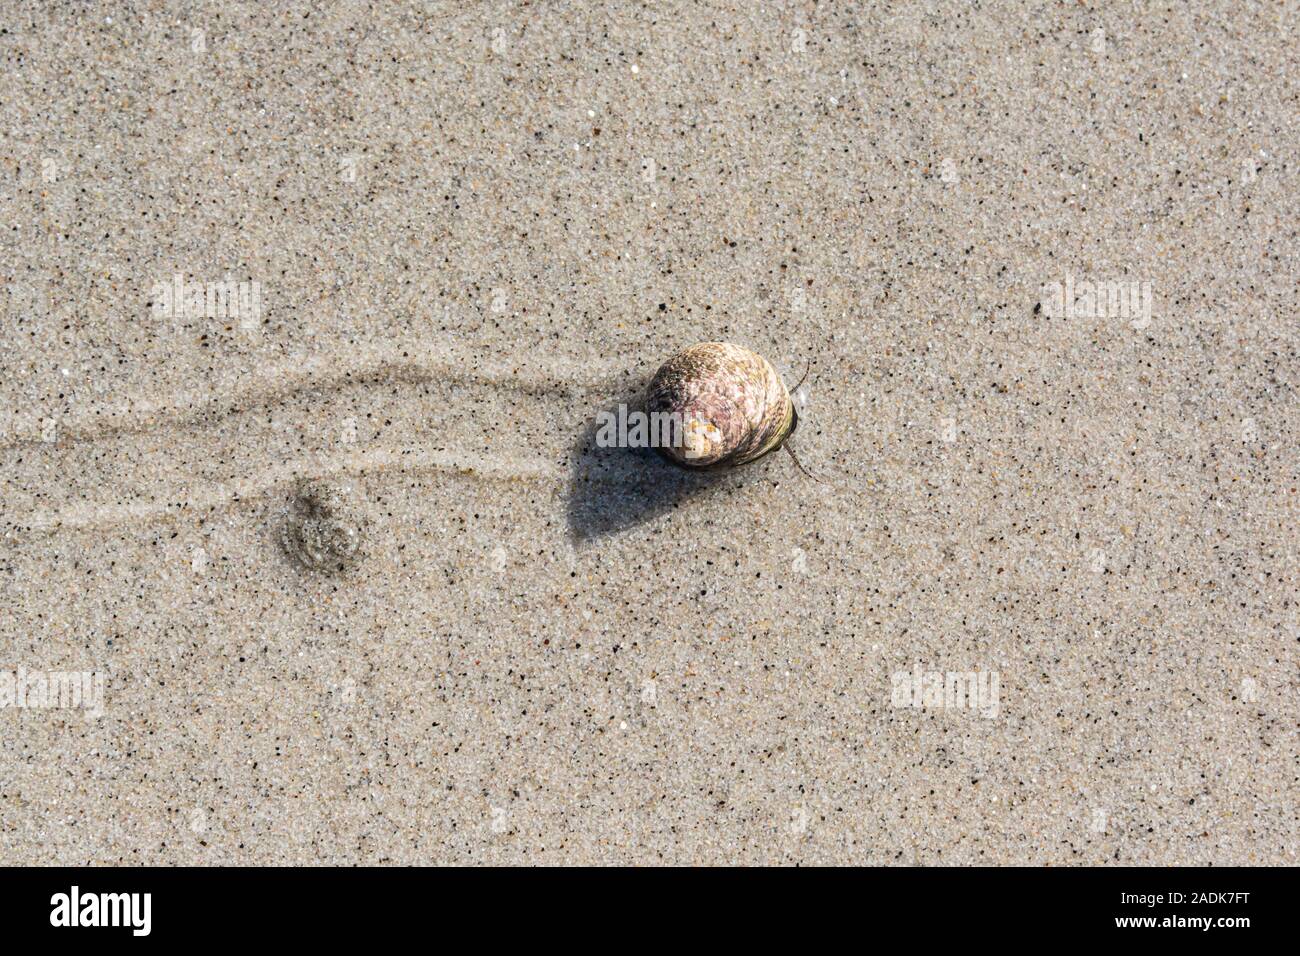 A top shell snail making tracks in wet sand Stock Photo